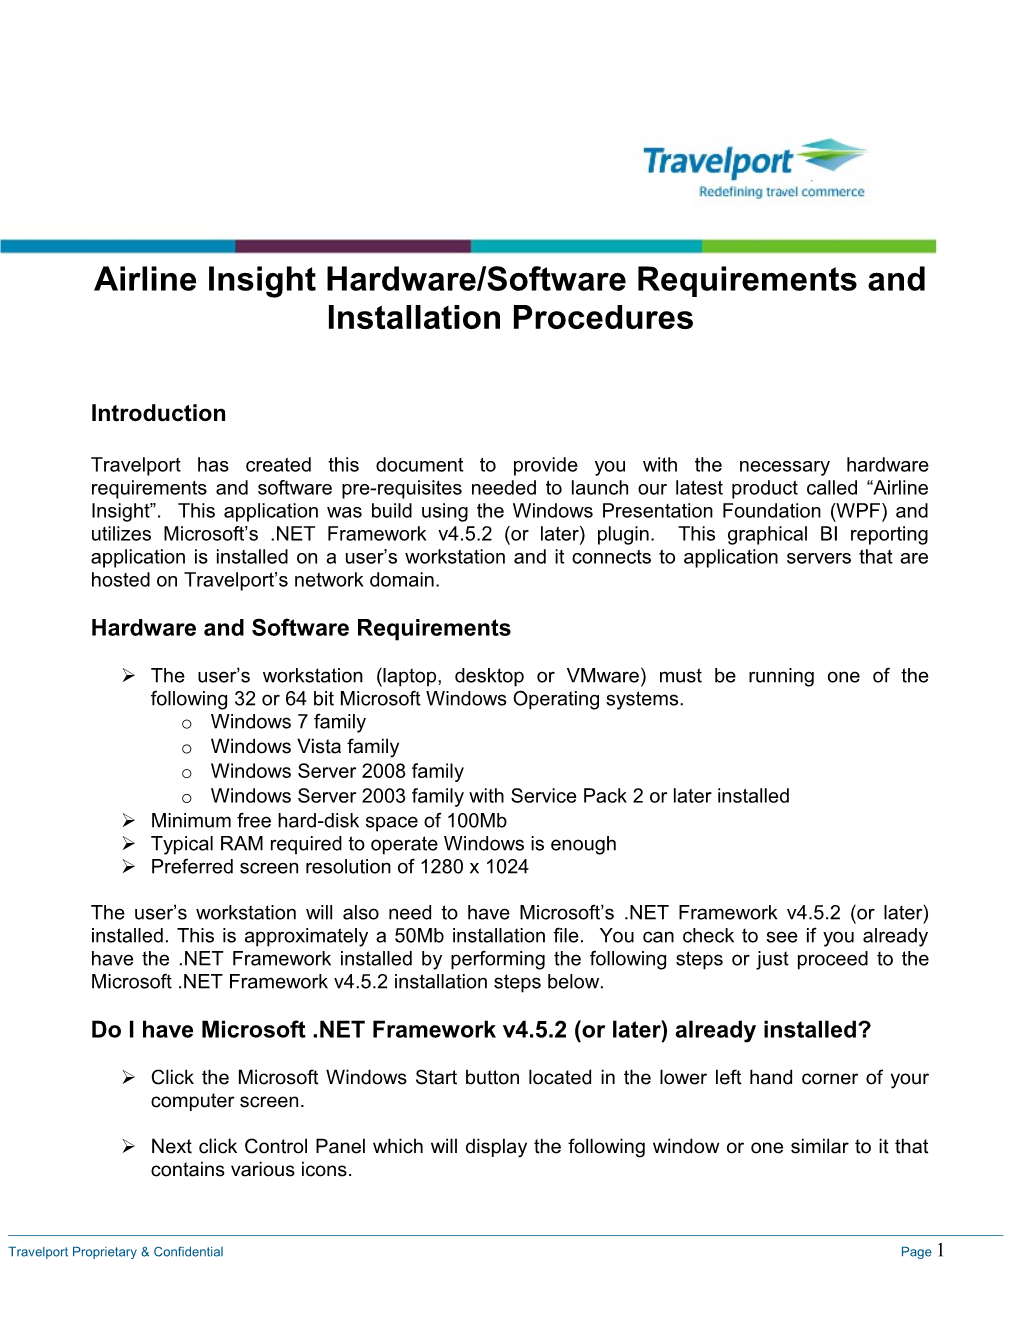 Airline Insighthardware/Software Requirements and Installation Procedures